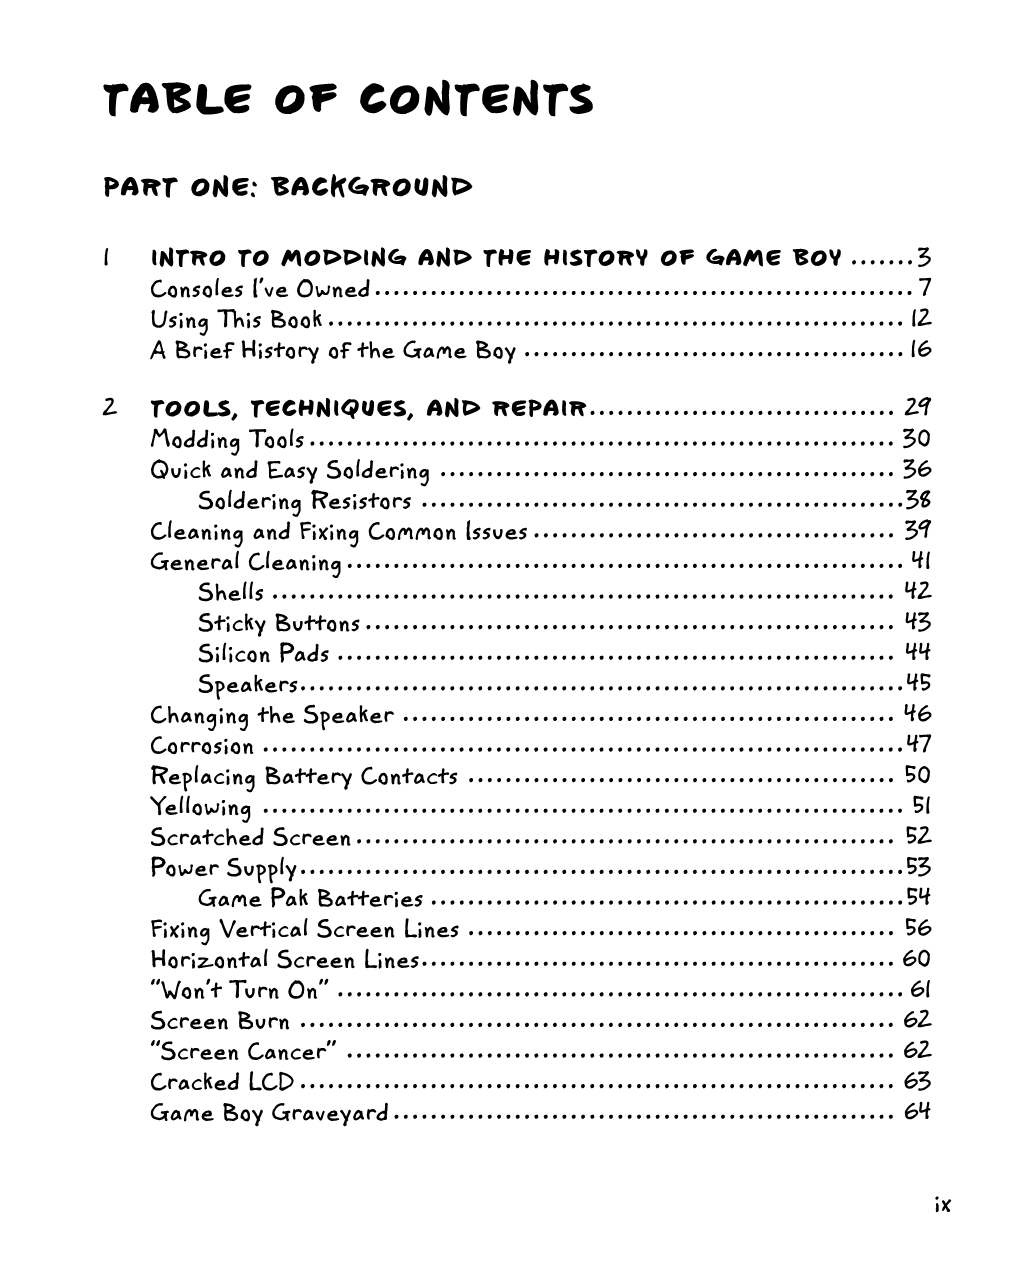 View the Detailed Table of Contents